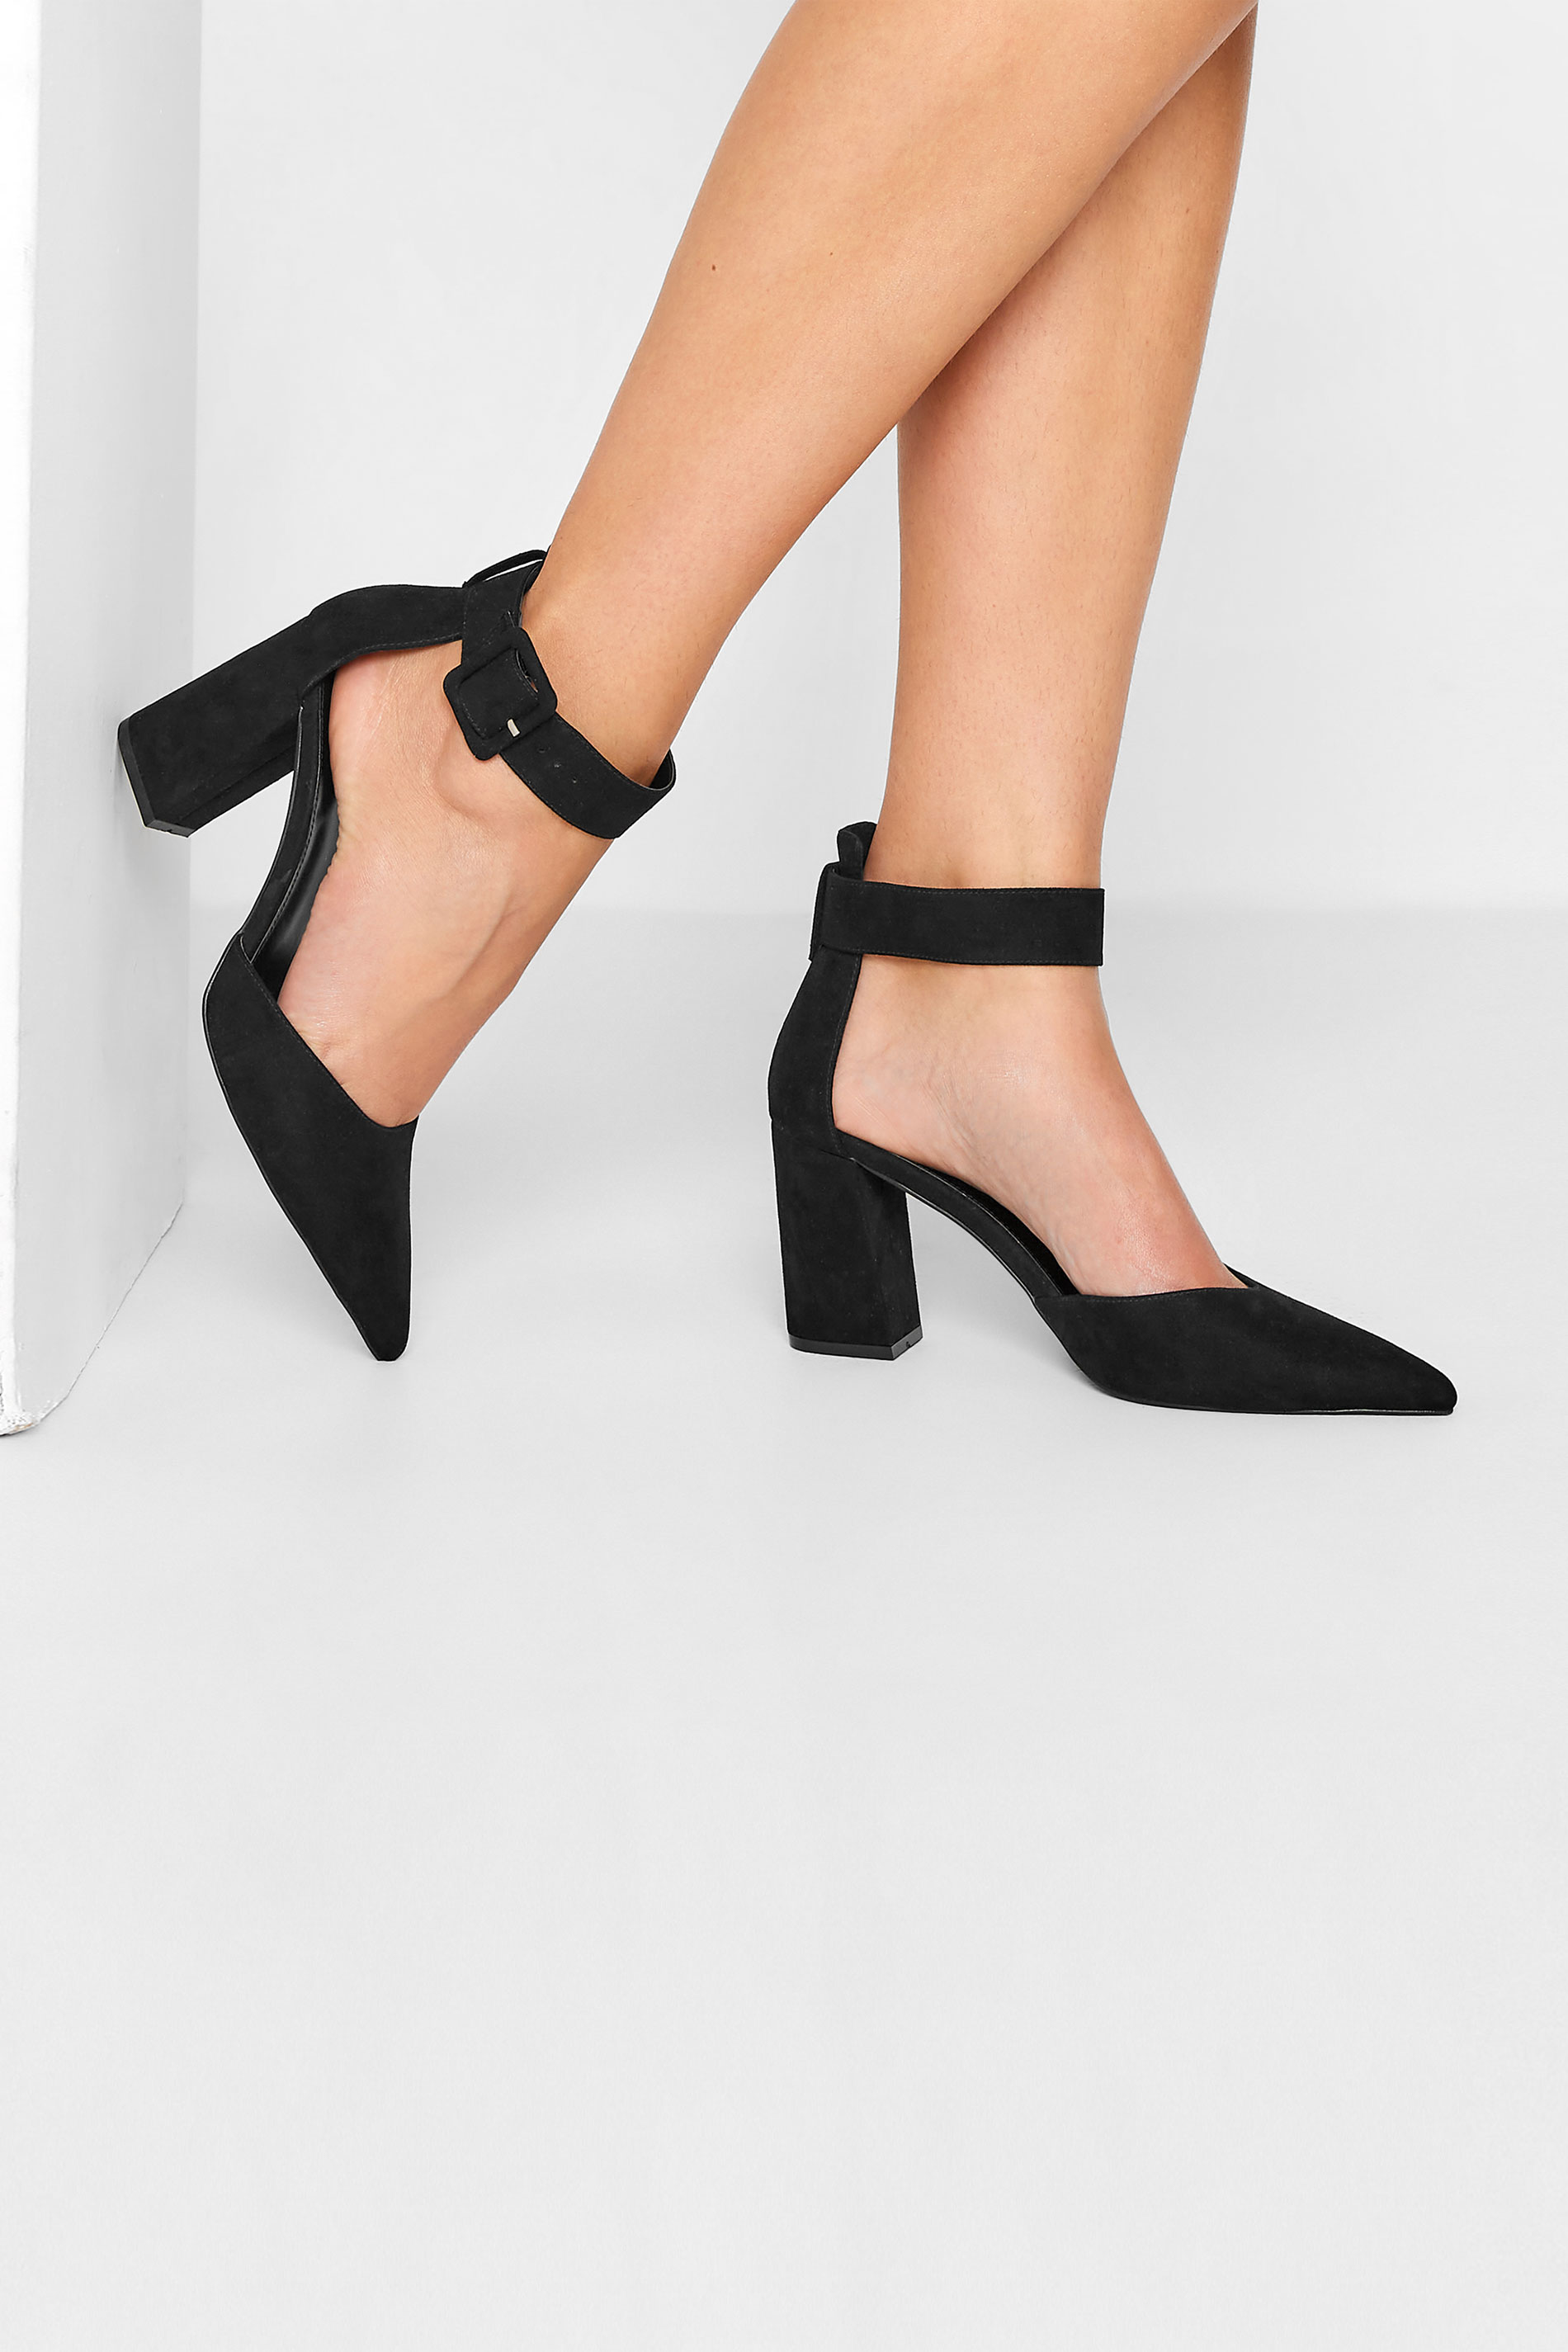 LTS Black Pointed Block Heel Court Shoes In Standard D Fit 1